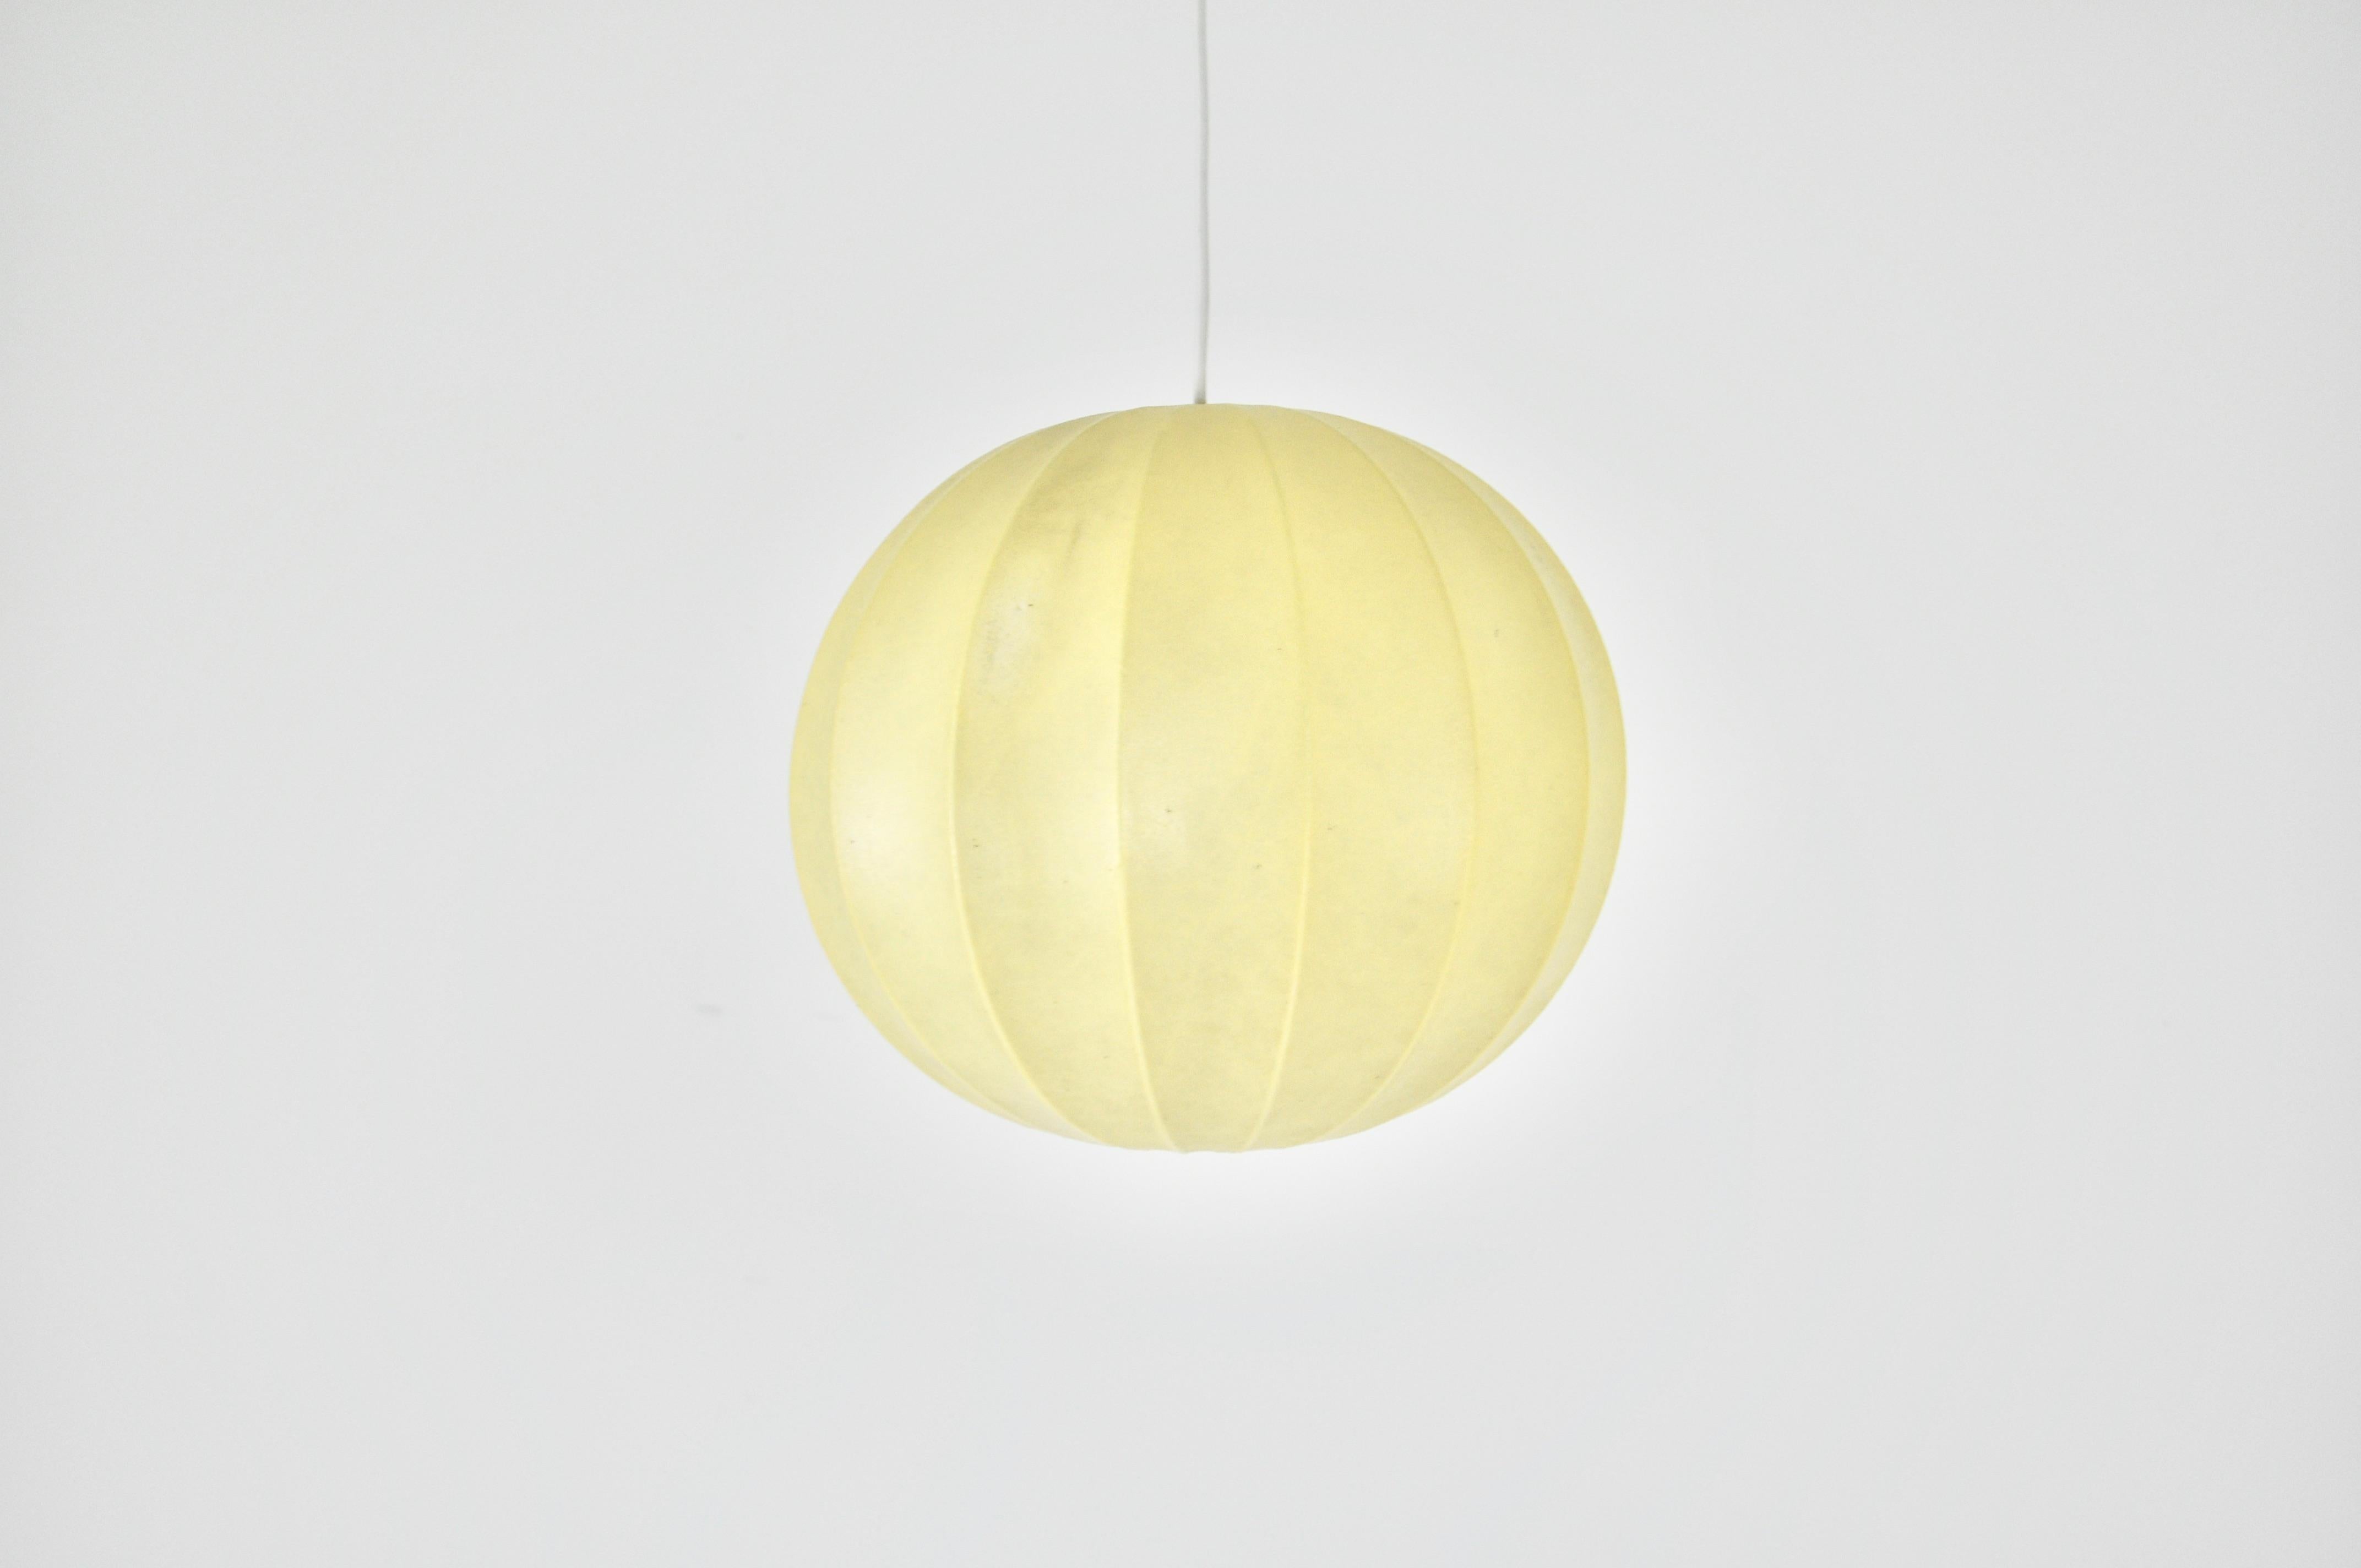 Italian Cocoon Hanging Lamp by Achille & Pier Giacomo Castiglioni for Flos, 1960s For Sale